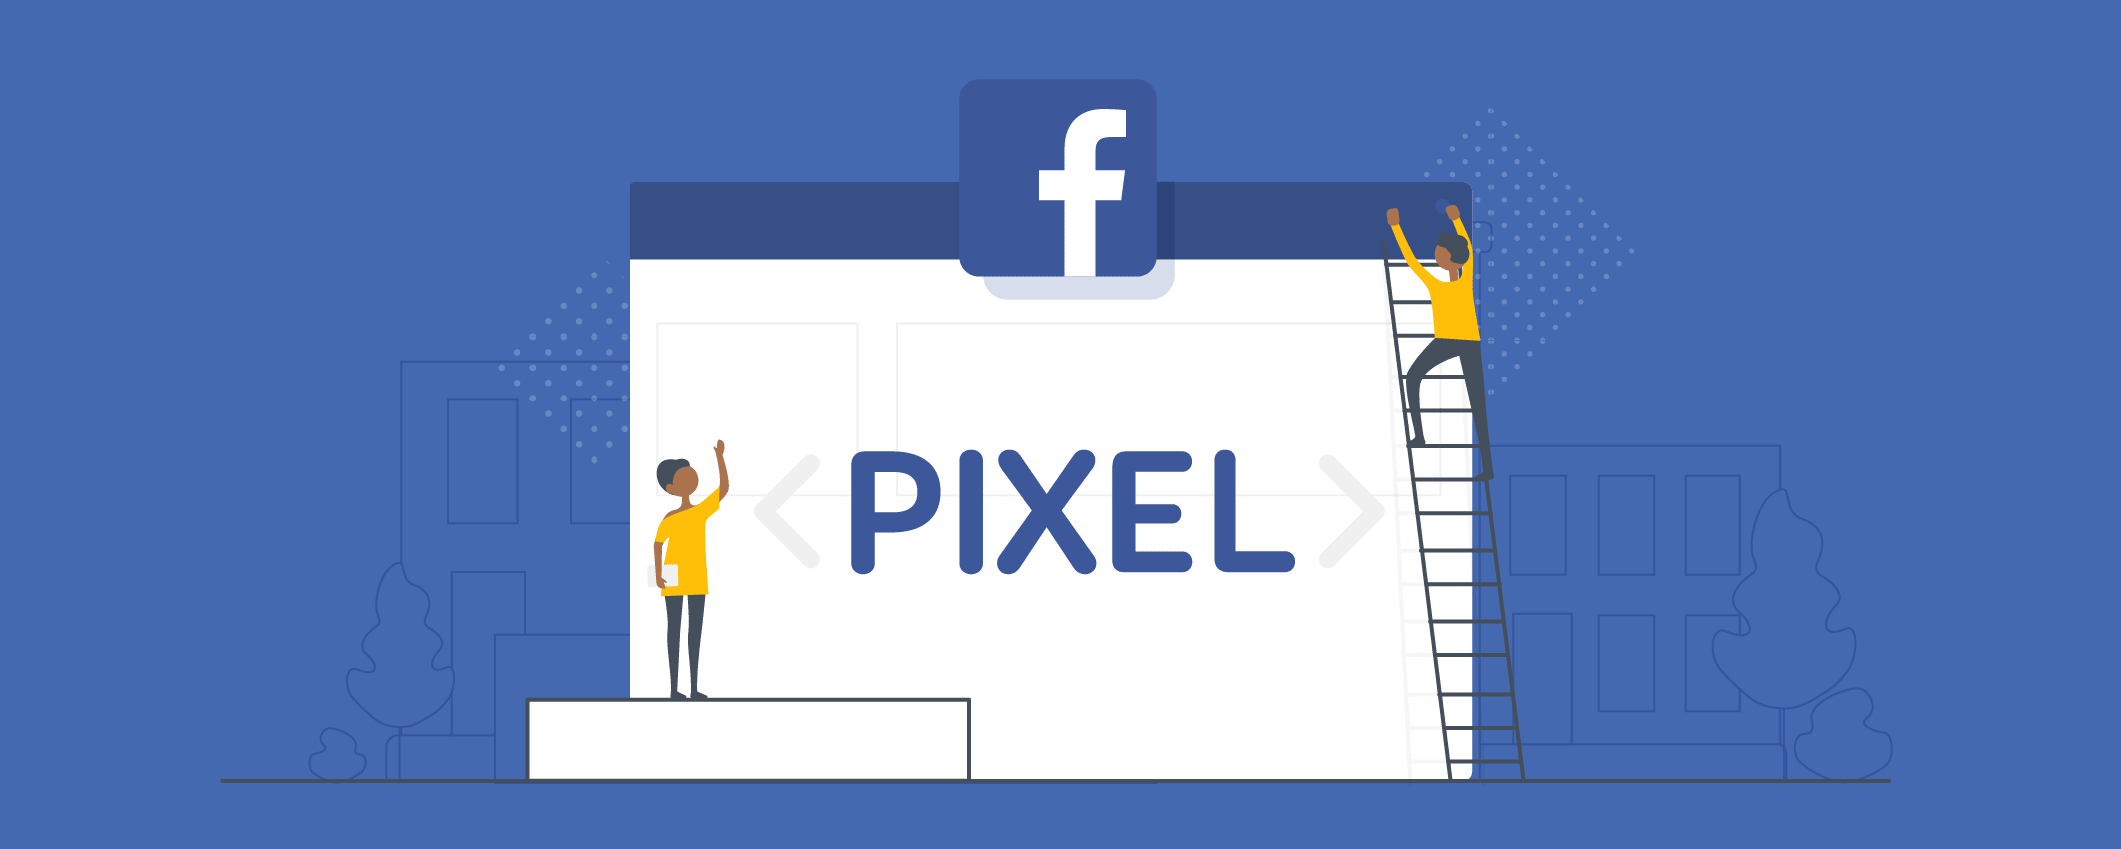 The Facebook Pixel Strategies to Run More Targeted Ads 1554105141